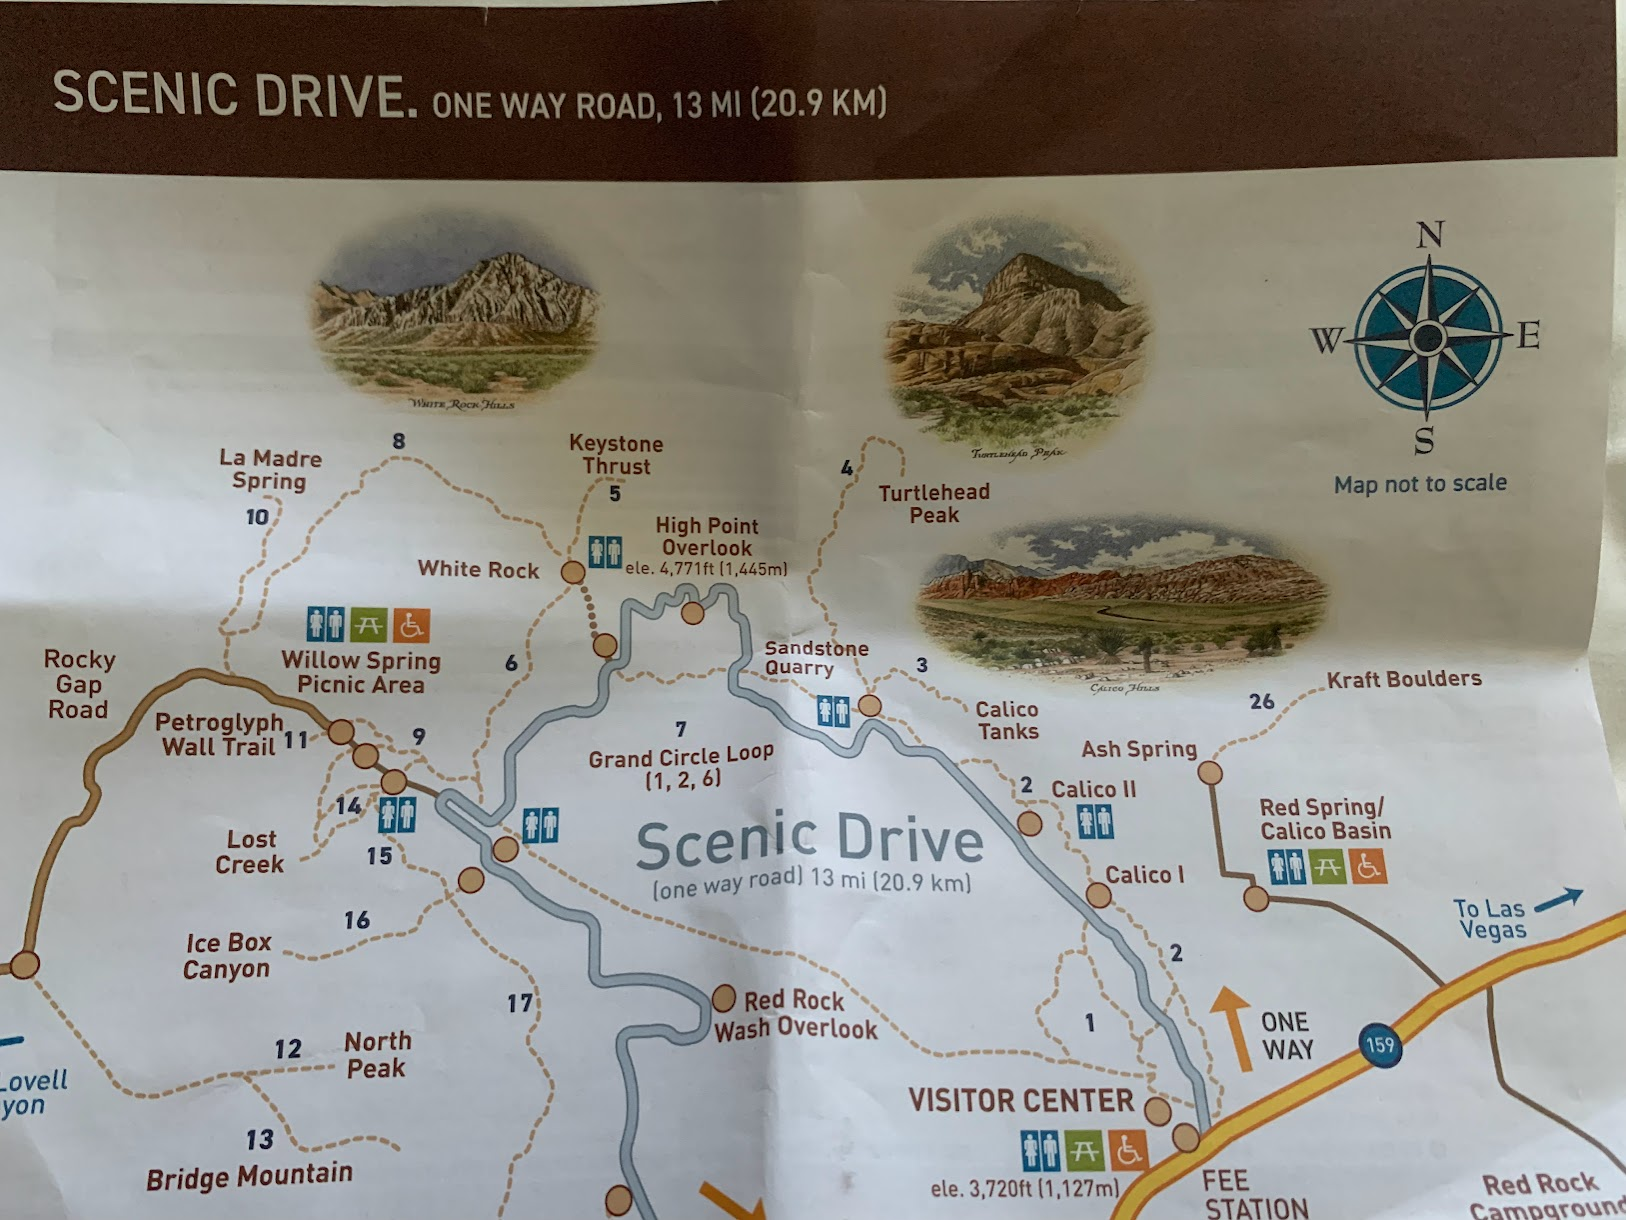 Red Rock Canyon National Conservation Area - Scenic Drive and trails